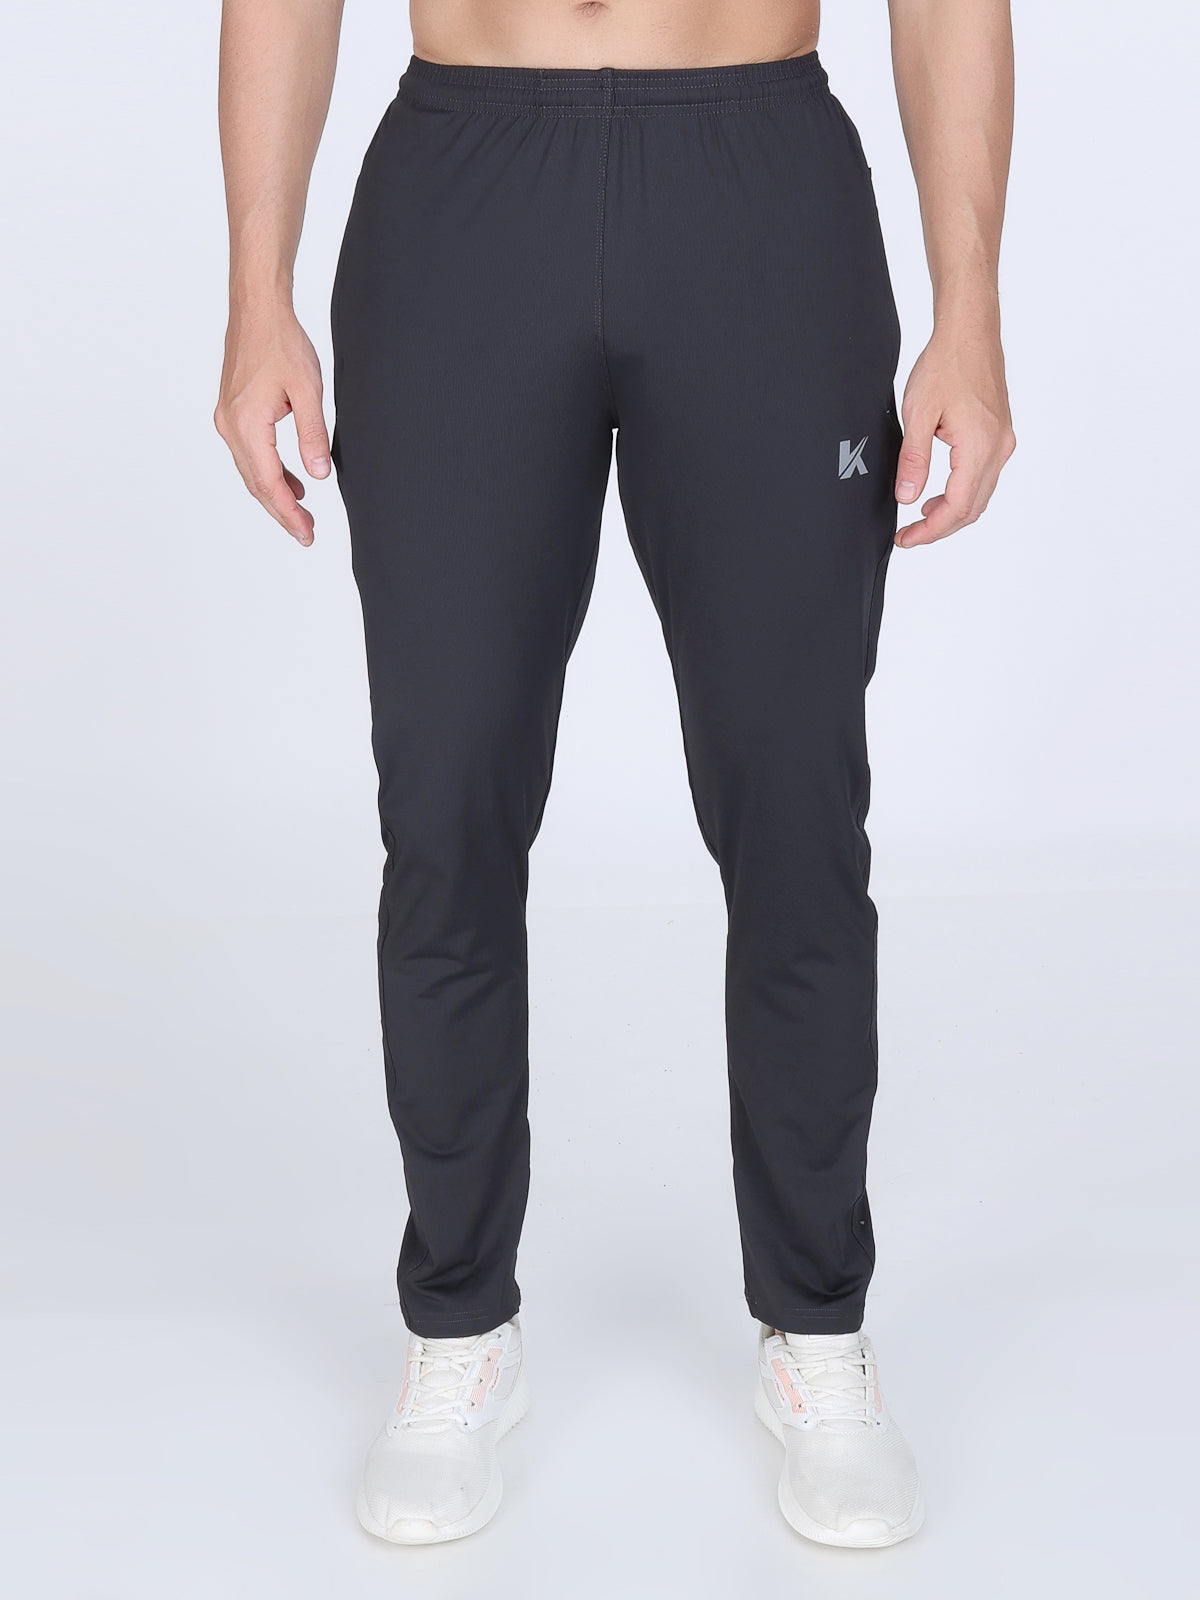 Combo of 2 Men's 4 Way Stretch Lining Silver and Coffee Track Pant